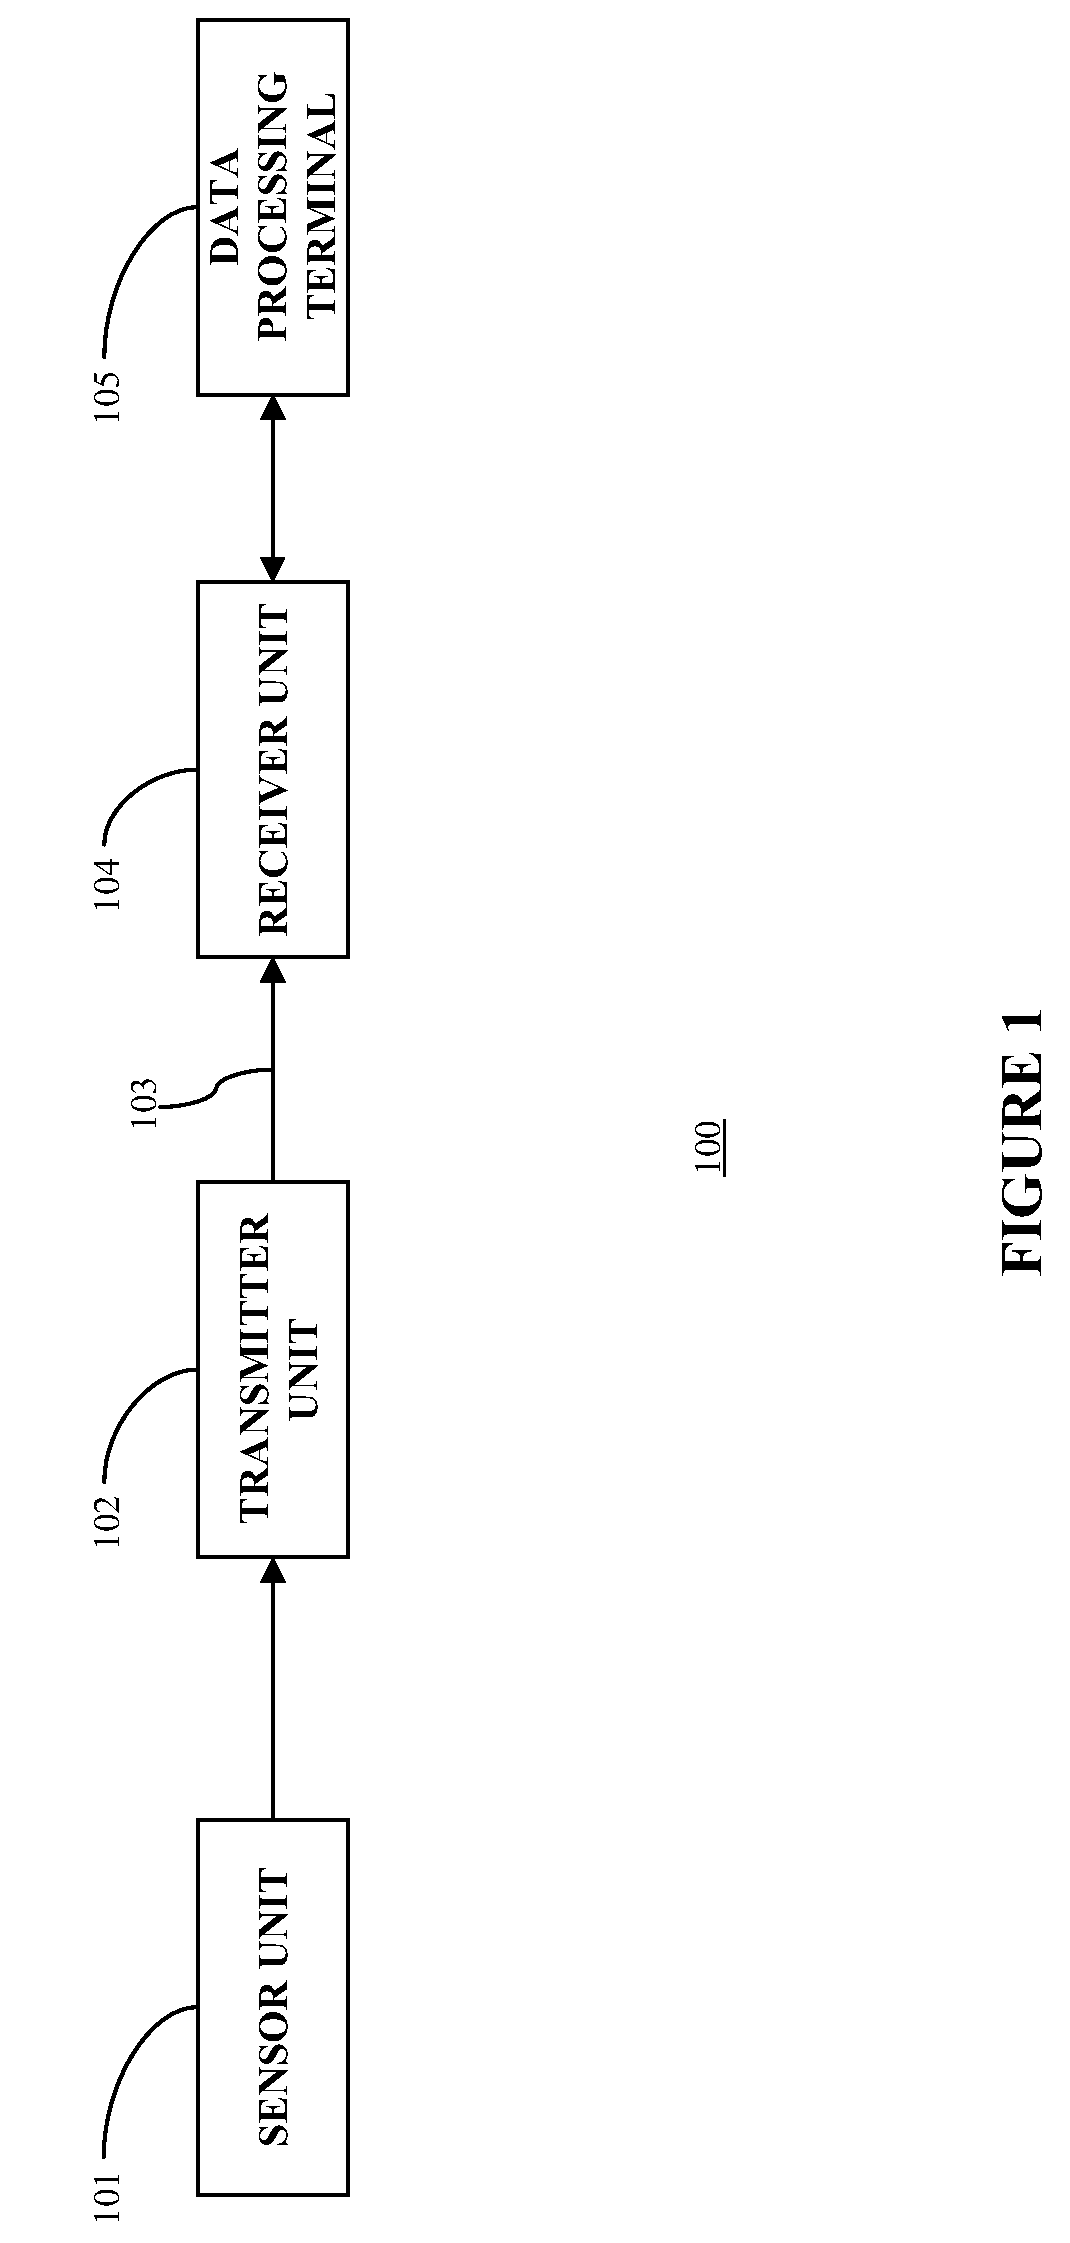 Method and apparatus for providing peak detection circuitry for data communication systems